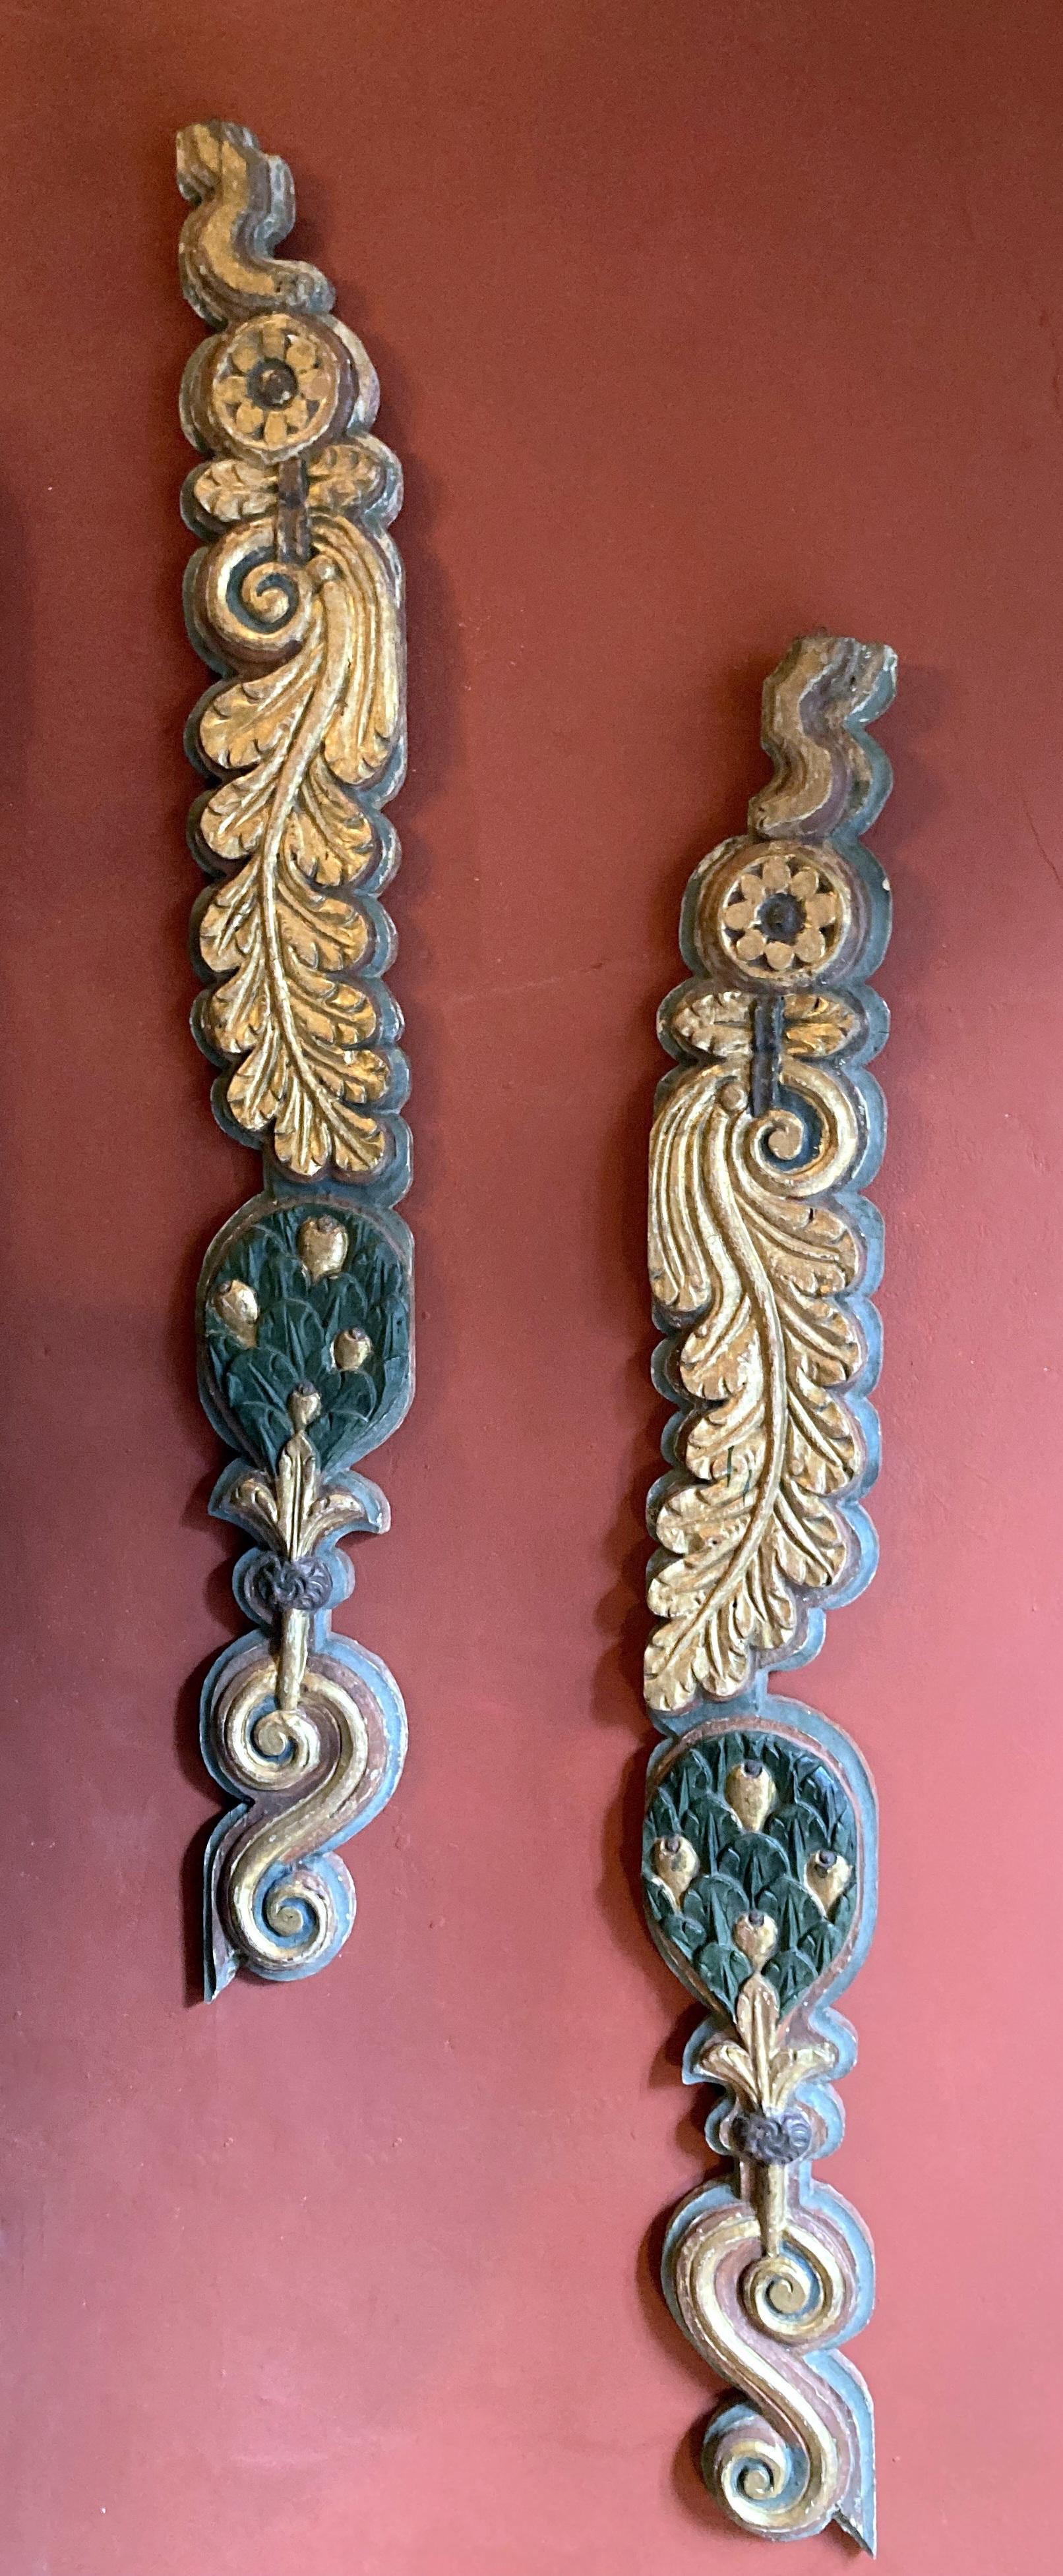 Italian Antique 18th Century Handcarved Polychrome Painted Pilaster Friezes For Sale 8